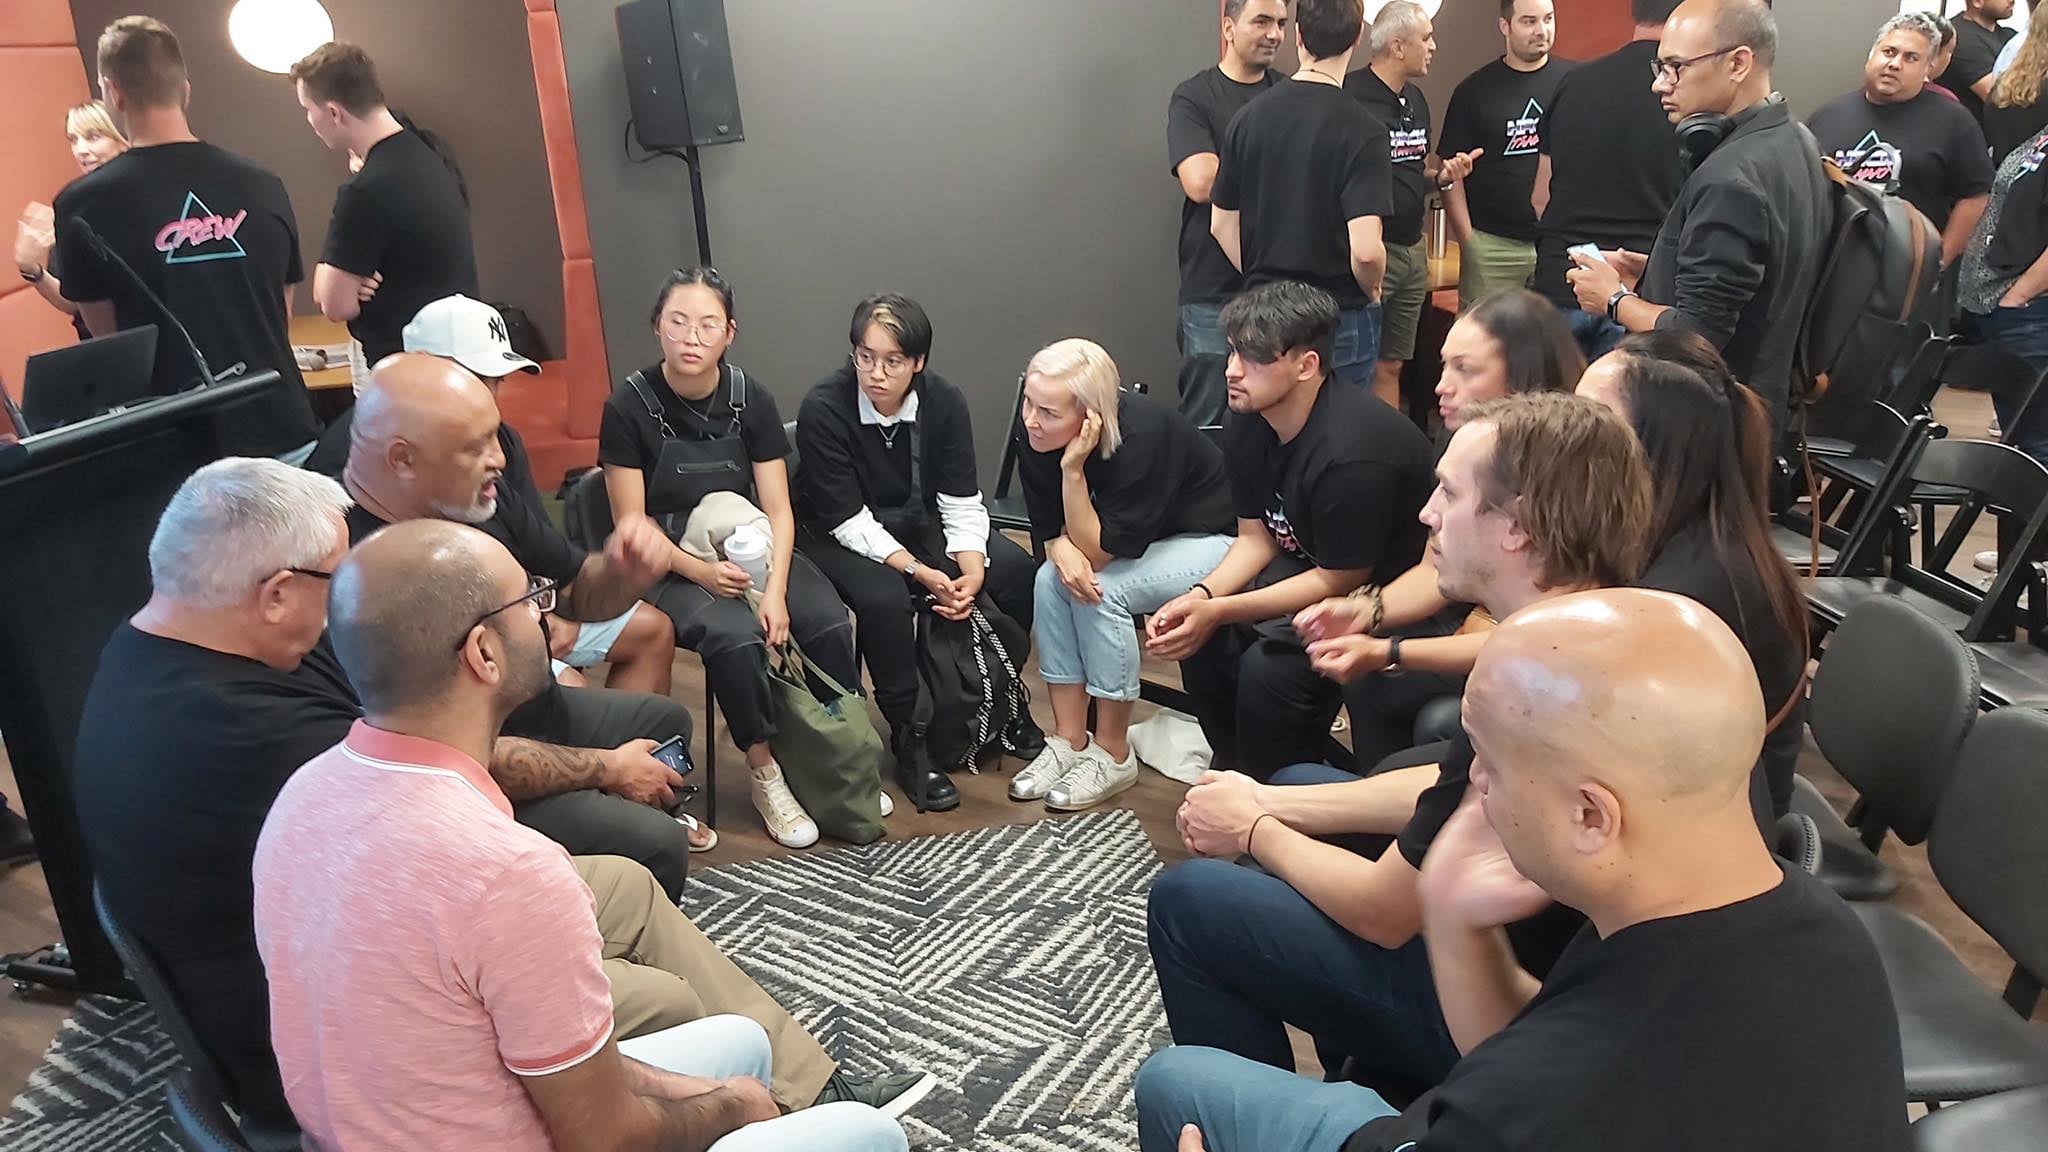 Hack Tāmaki was held over 48 hours in Auckland. PC Tāmaki AKL